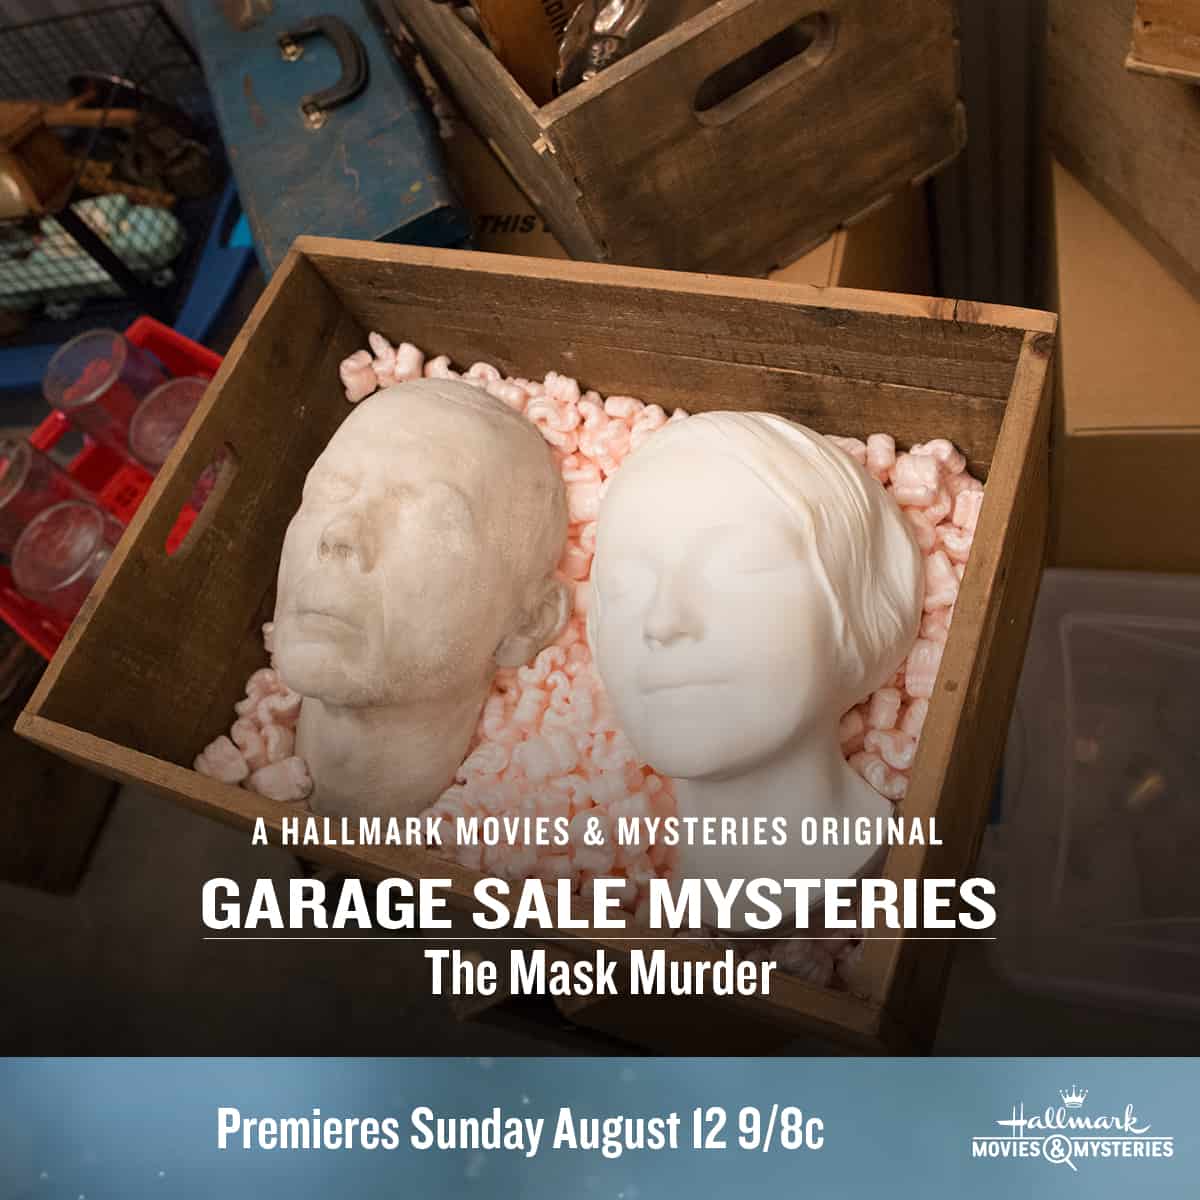 Hallmark Movies & Mysteries "Garage Sale Mystery: The Mask Murder" Premiering this Sunday, Aug. 12th at 9pm/8c!